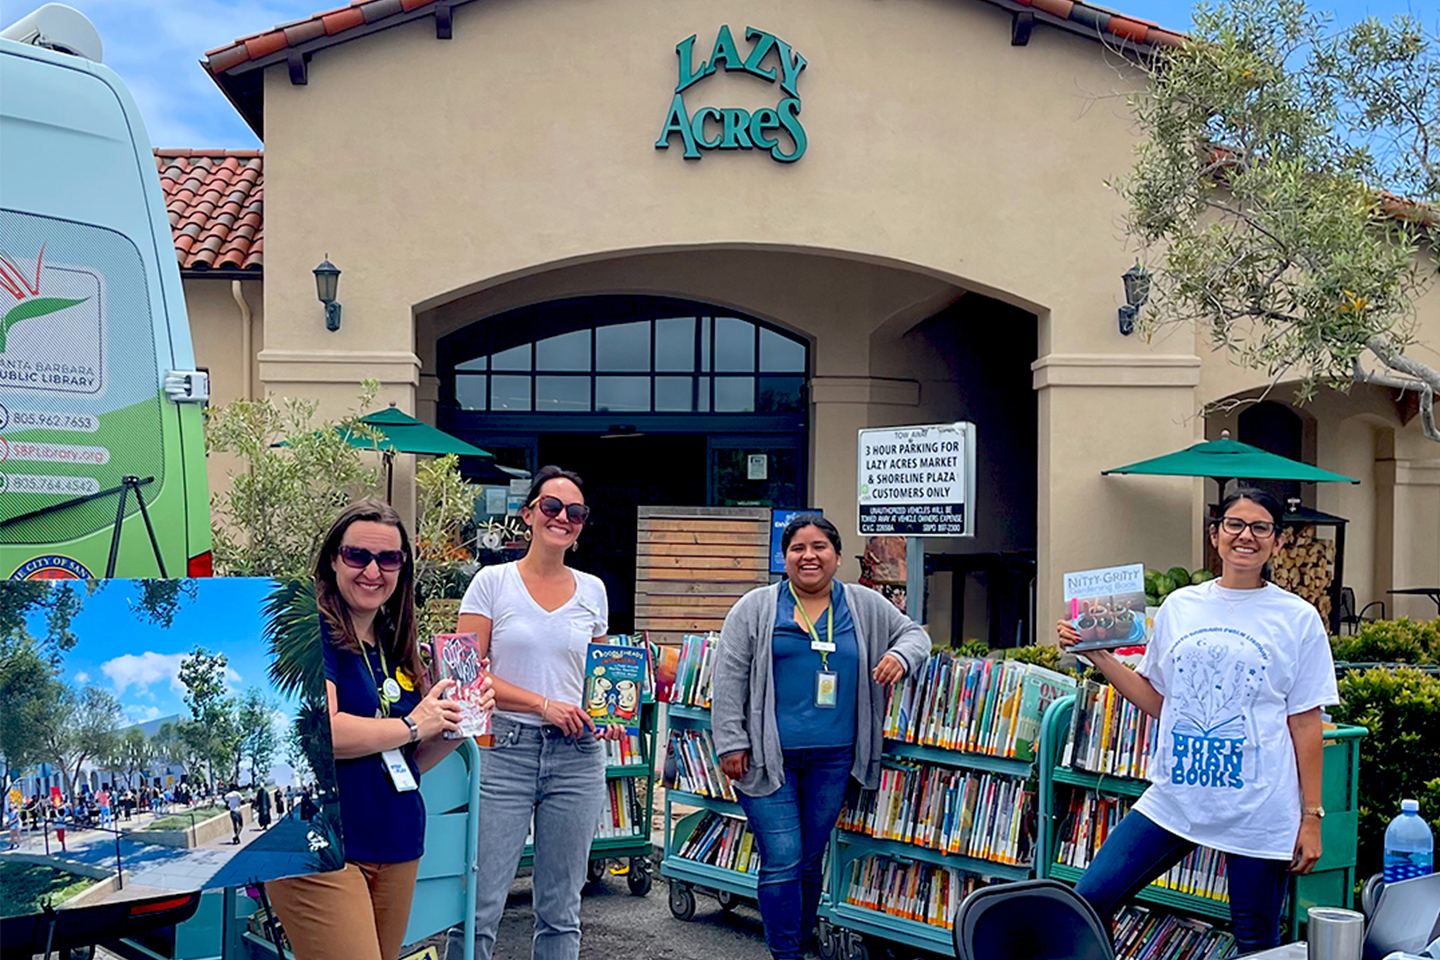 group of women standing in front of a Lazy Acres store with racks of books